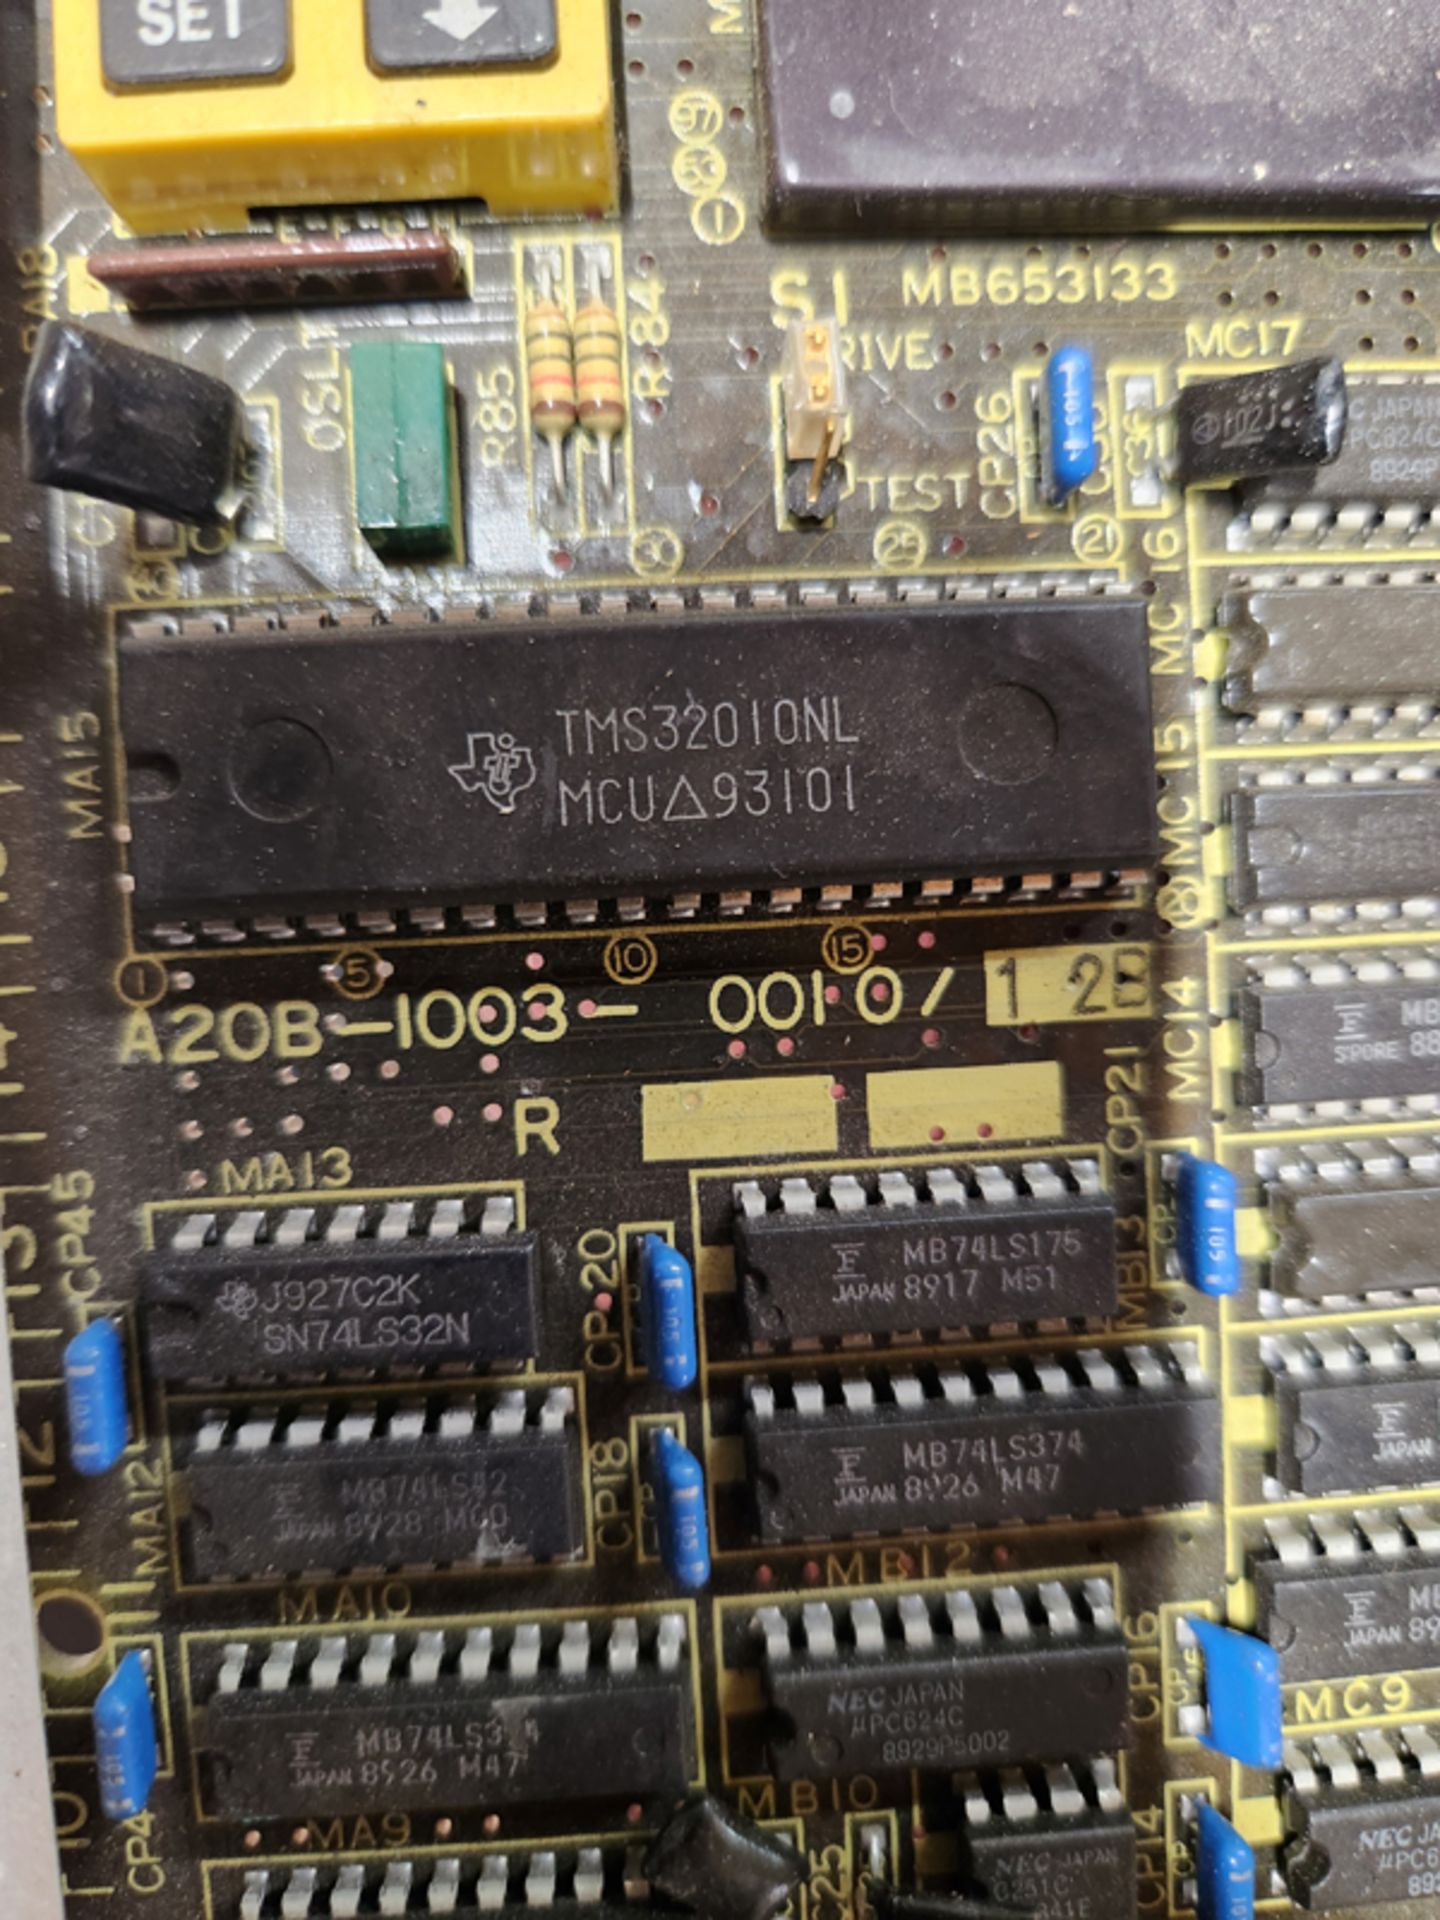 2 FANUC BOARDS A20B-1003-0010 - Image 4 of 4